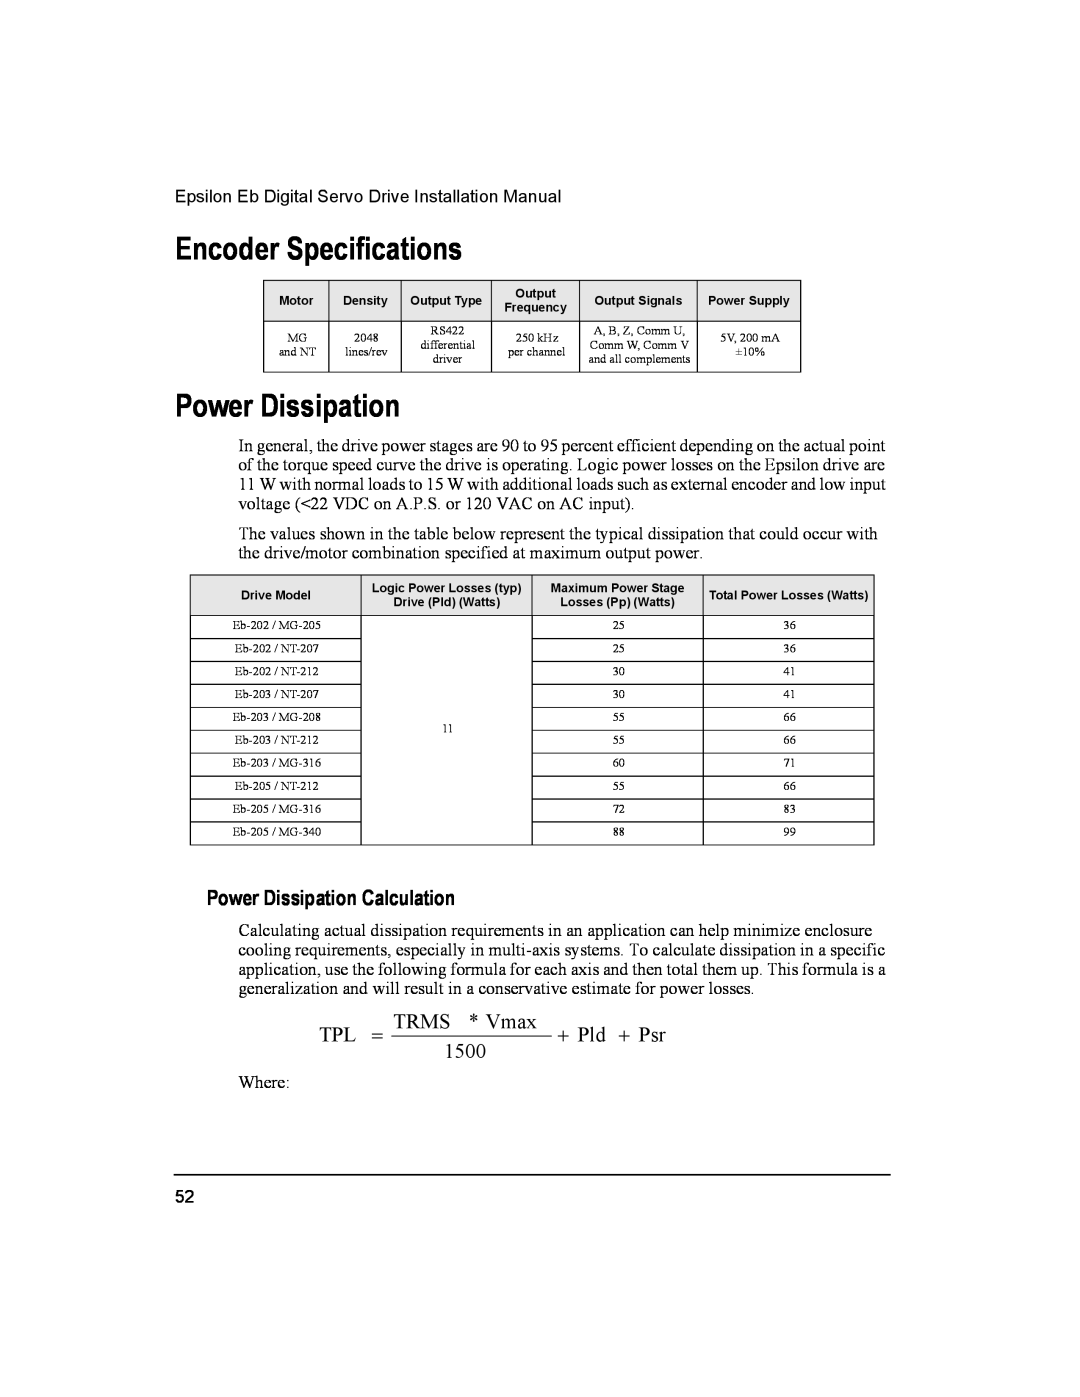 Emerson 400501-05 Encoder Specifications, Power Dissipation Calculation, Trms, Vmax, + Pld + Psr, 1500 